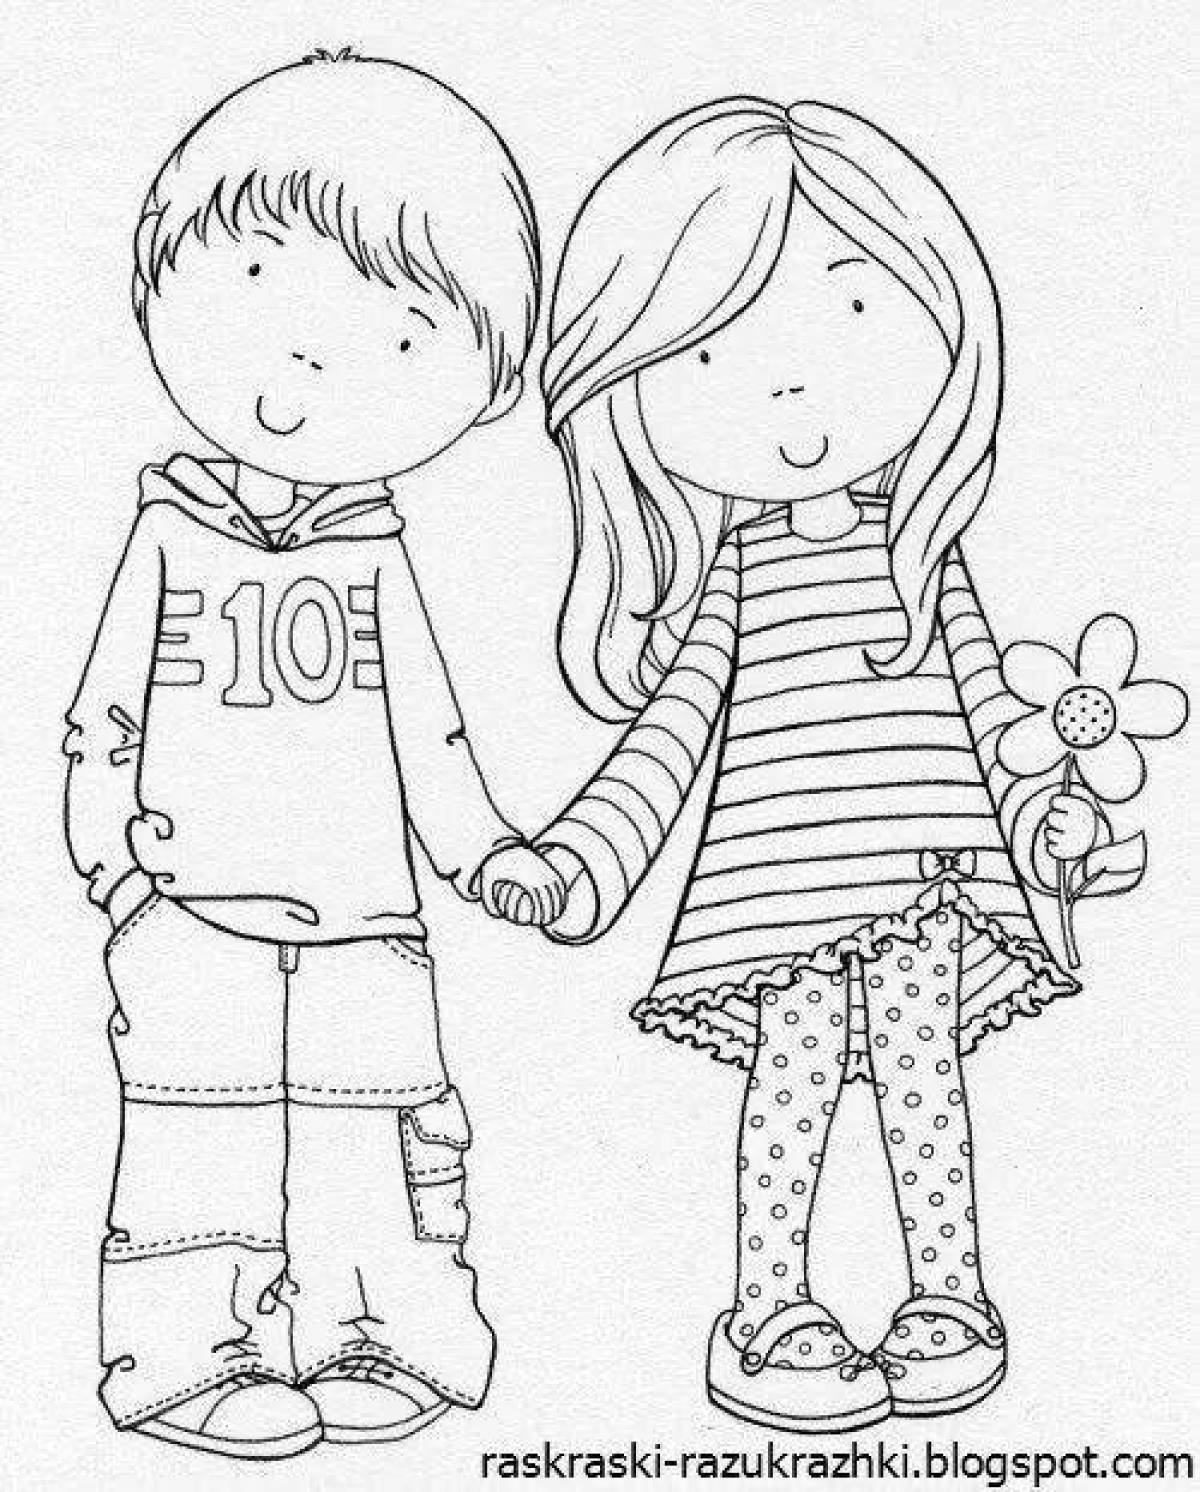 Boys and girls pictures for kids #6